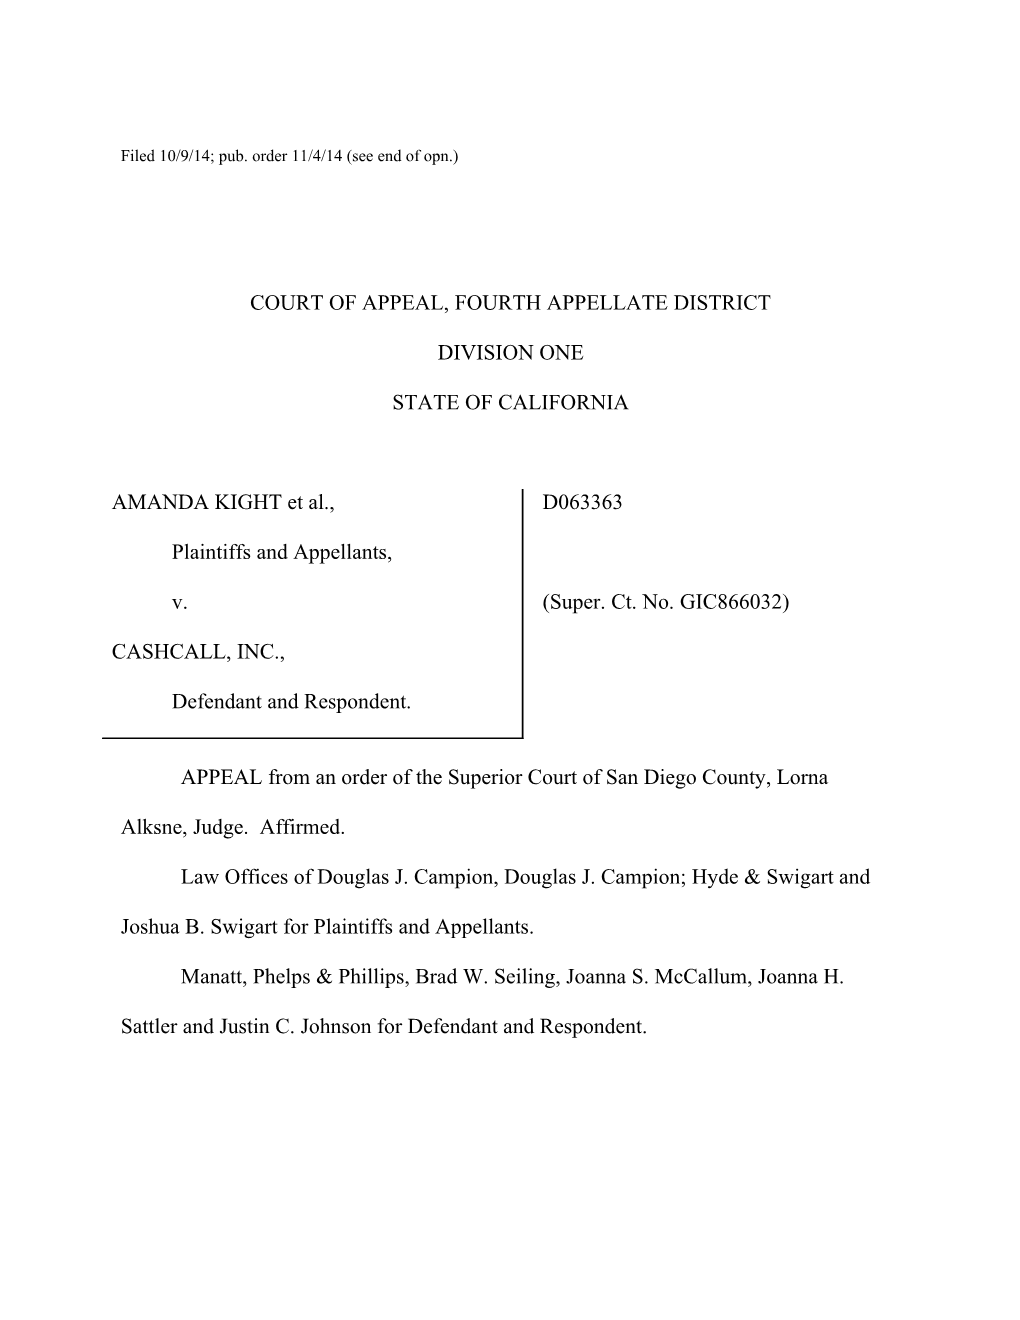 Filed 10/9/14; Pub. Order 11/4/14 (See End of Opn.)